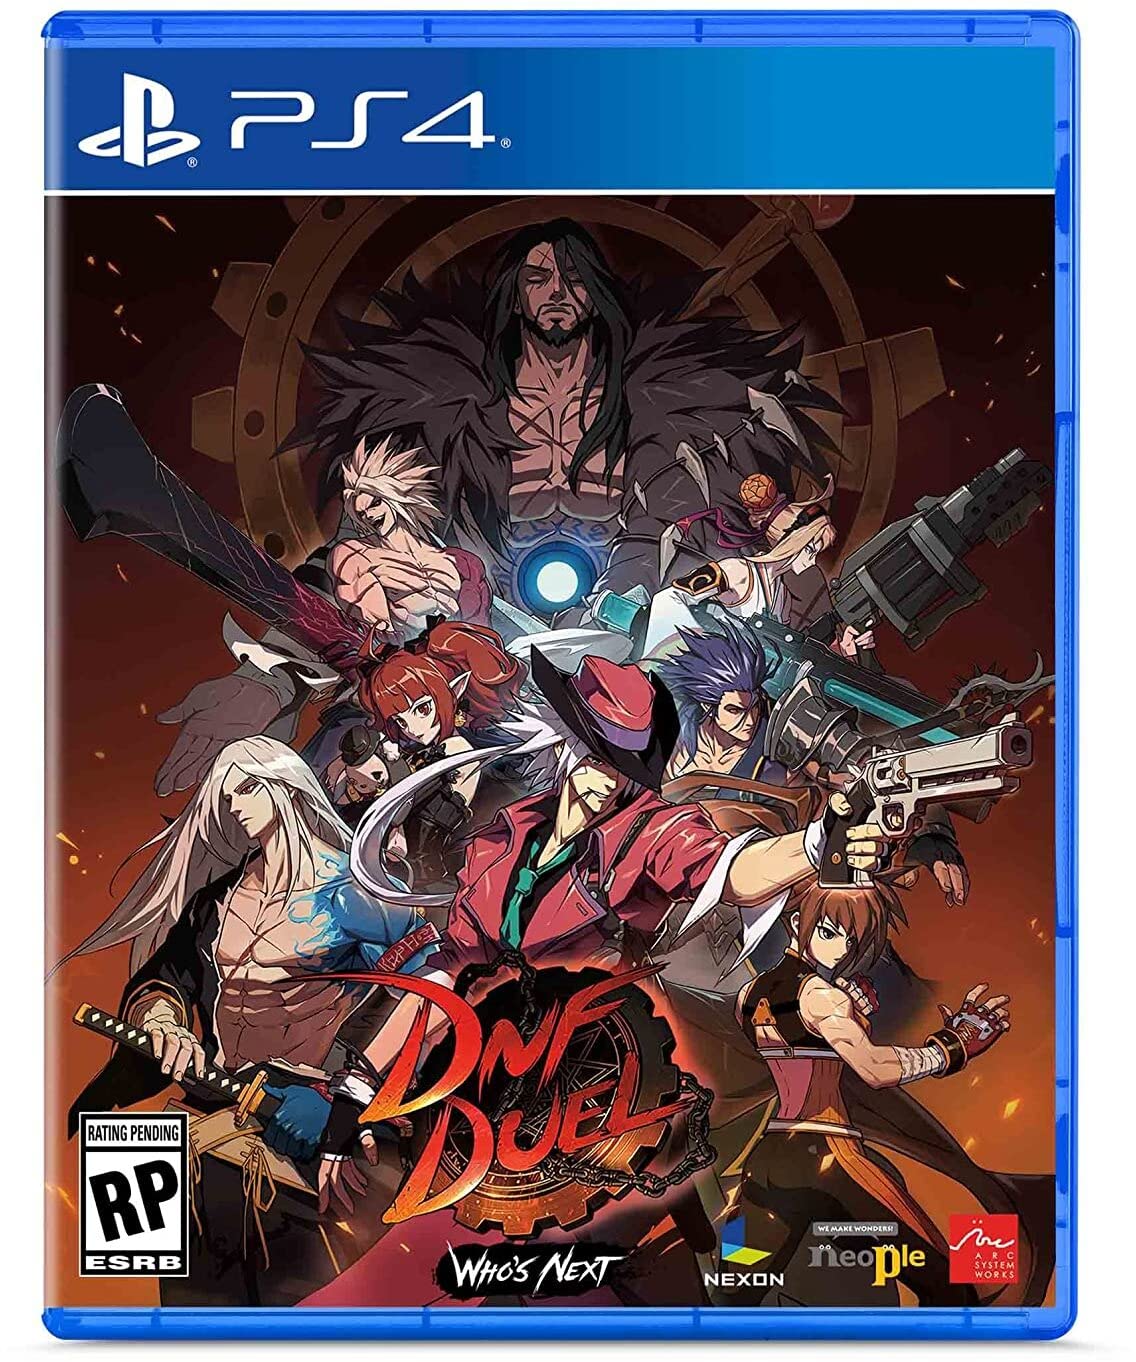 DNF Duel (PS4), Arc System Works, Eighting, Neople